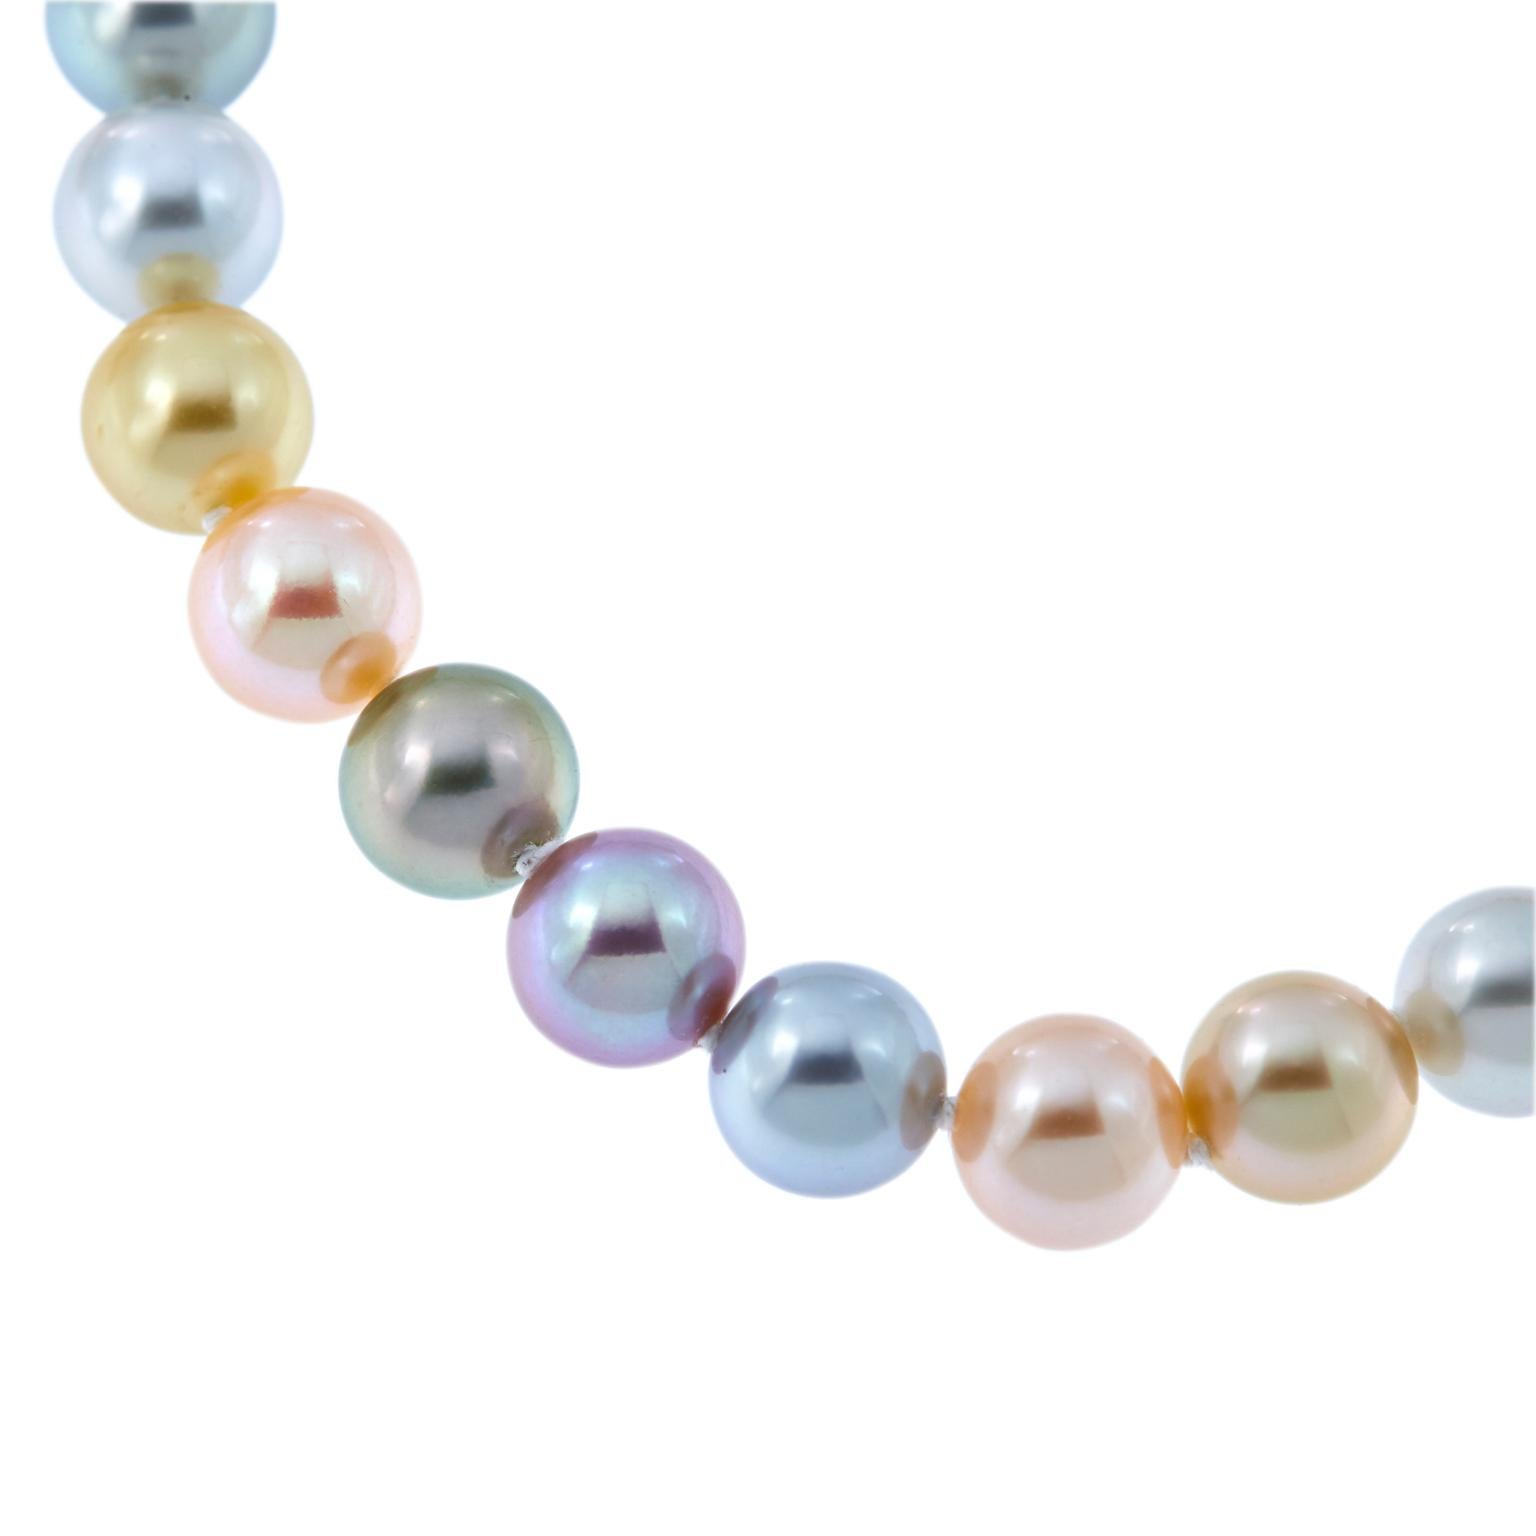 Multicolored South Sea and Freshwater Pearls Necklace 1